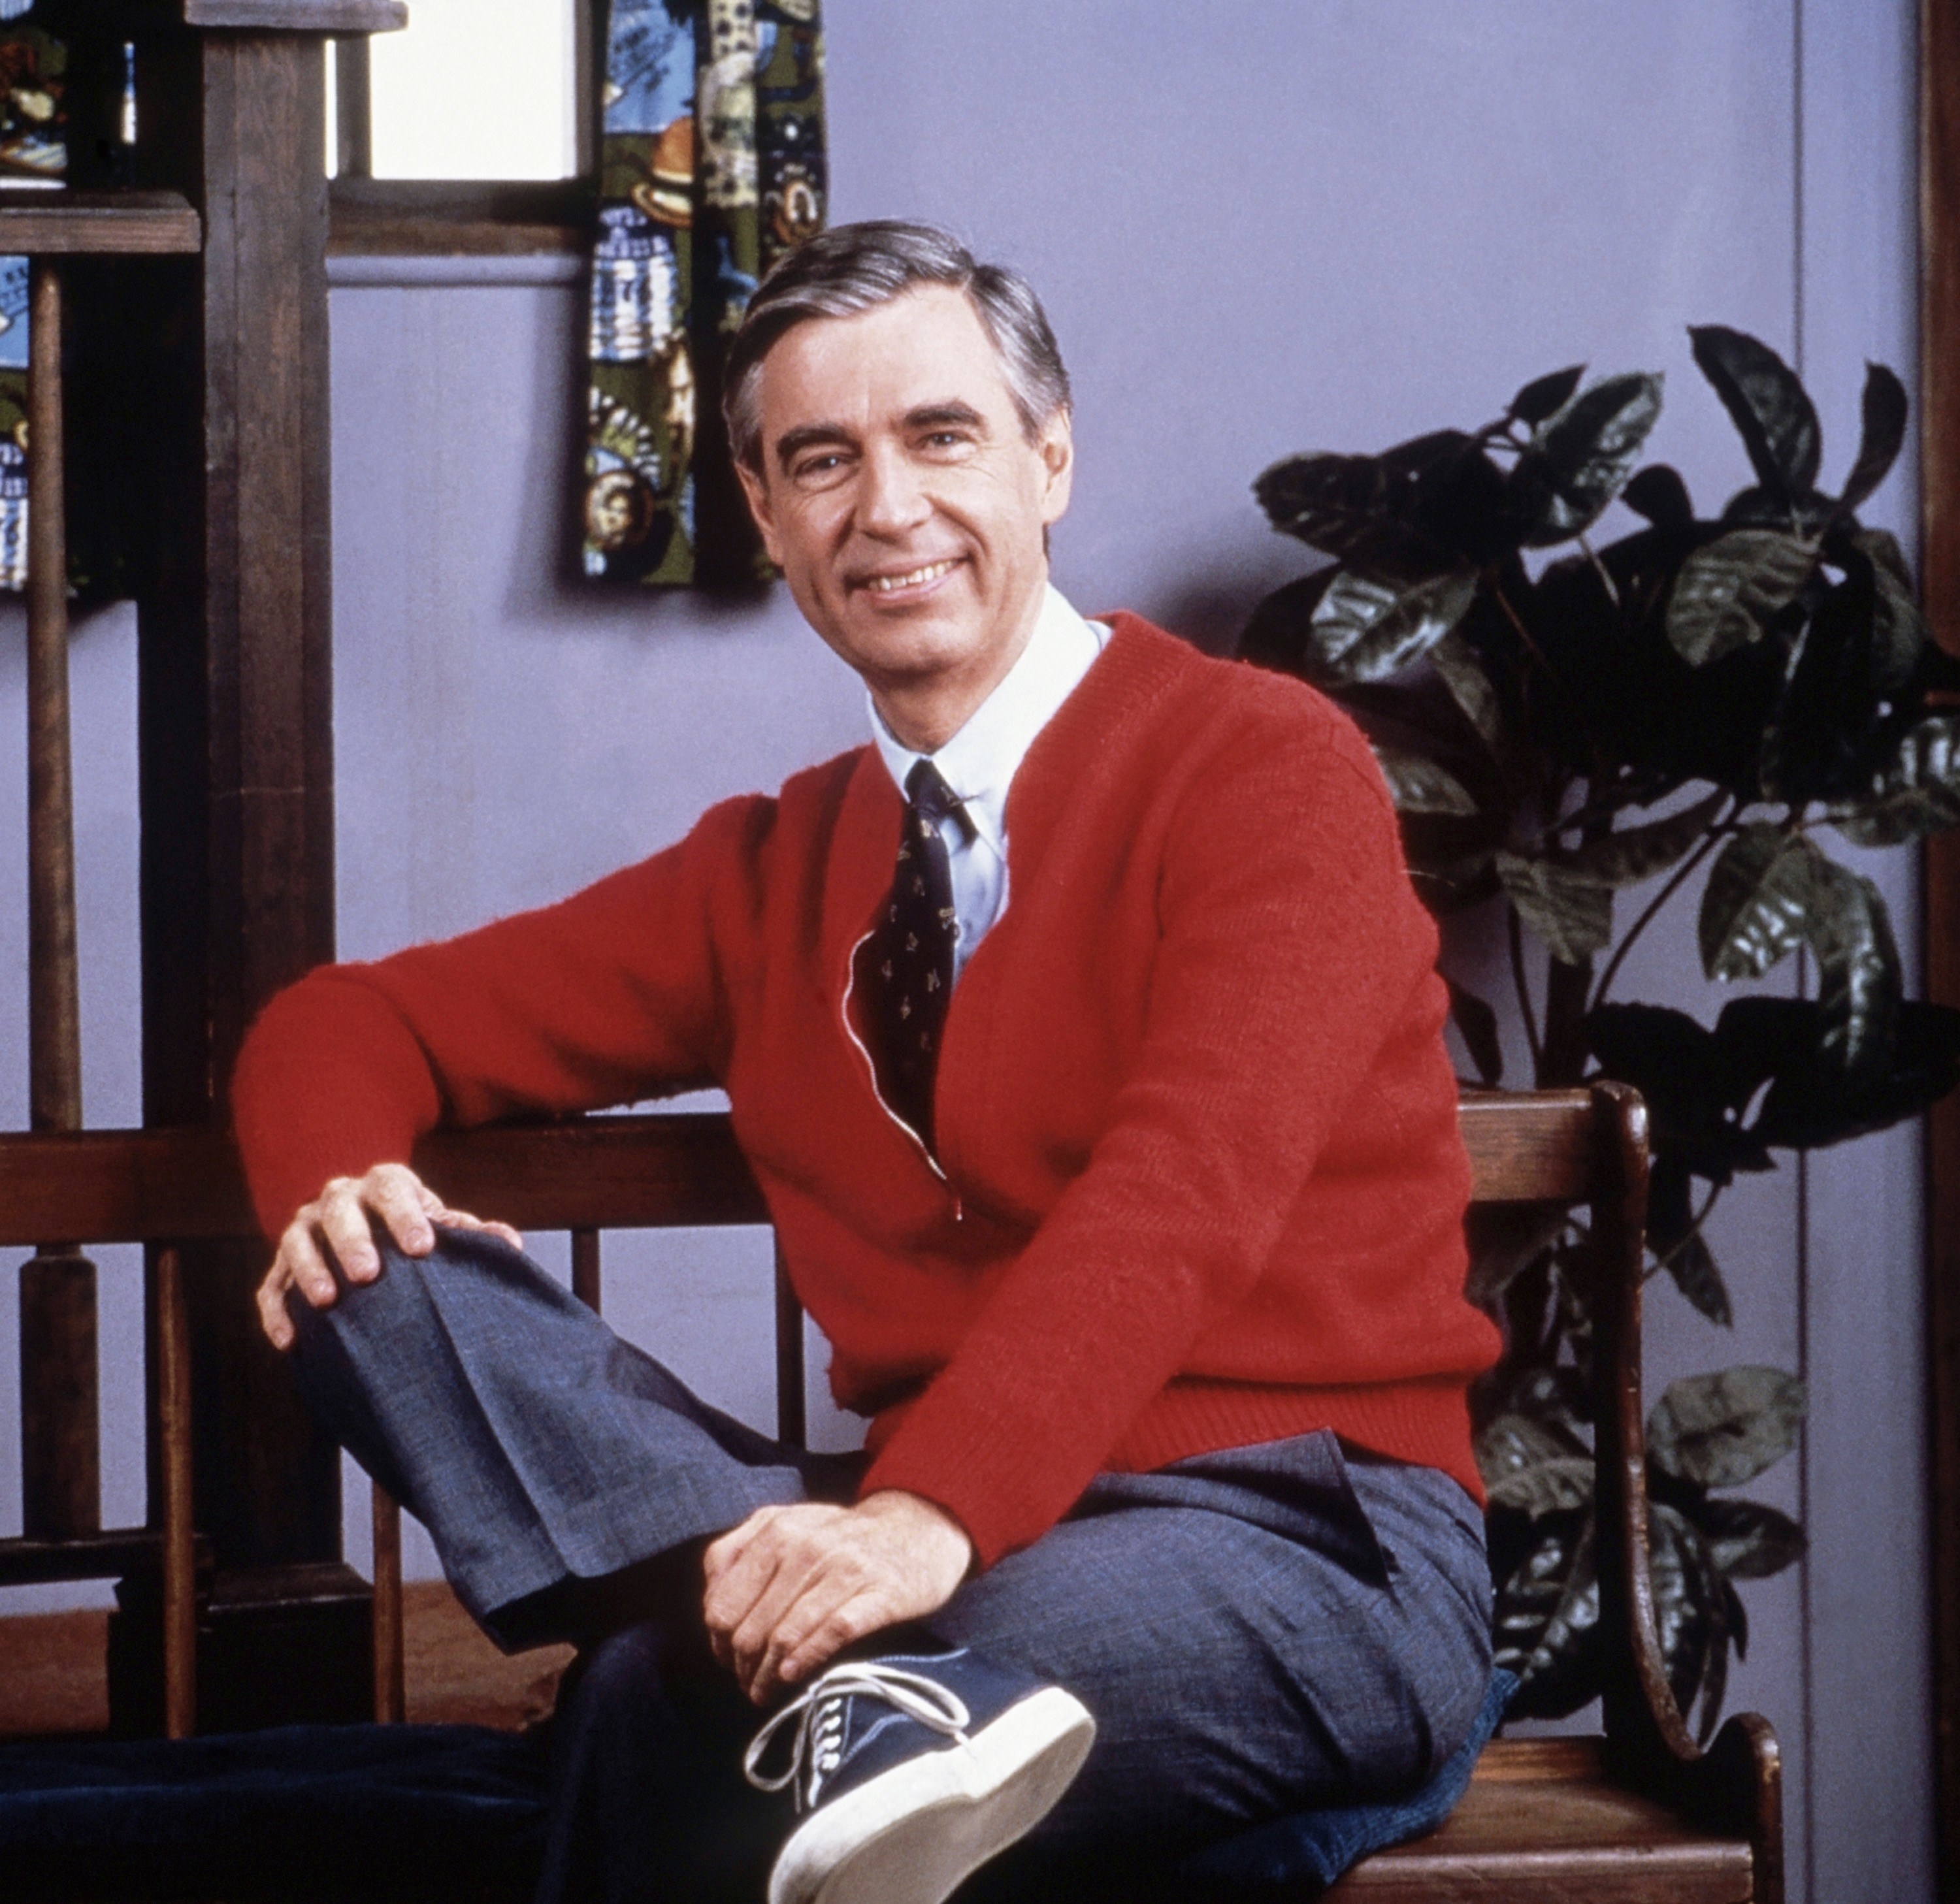 mister rogers poses on a bench